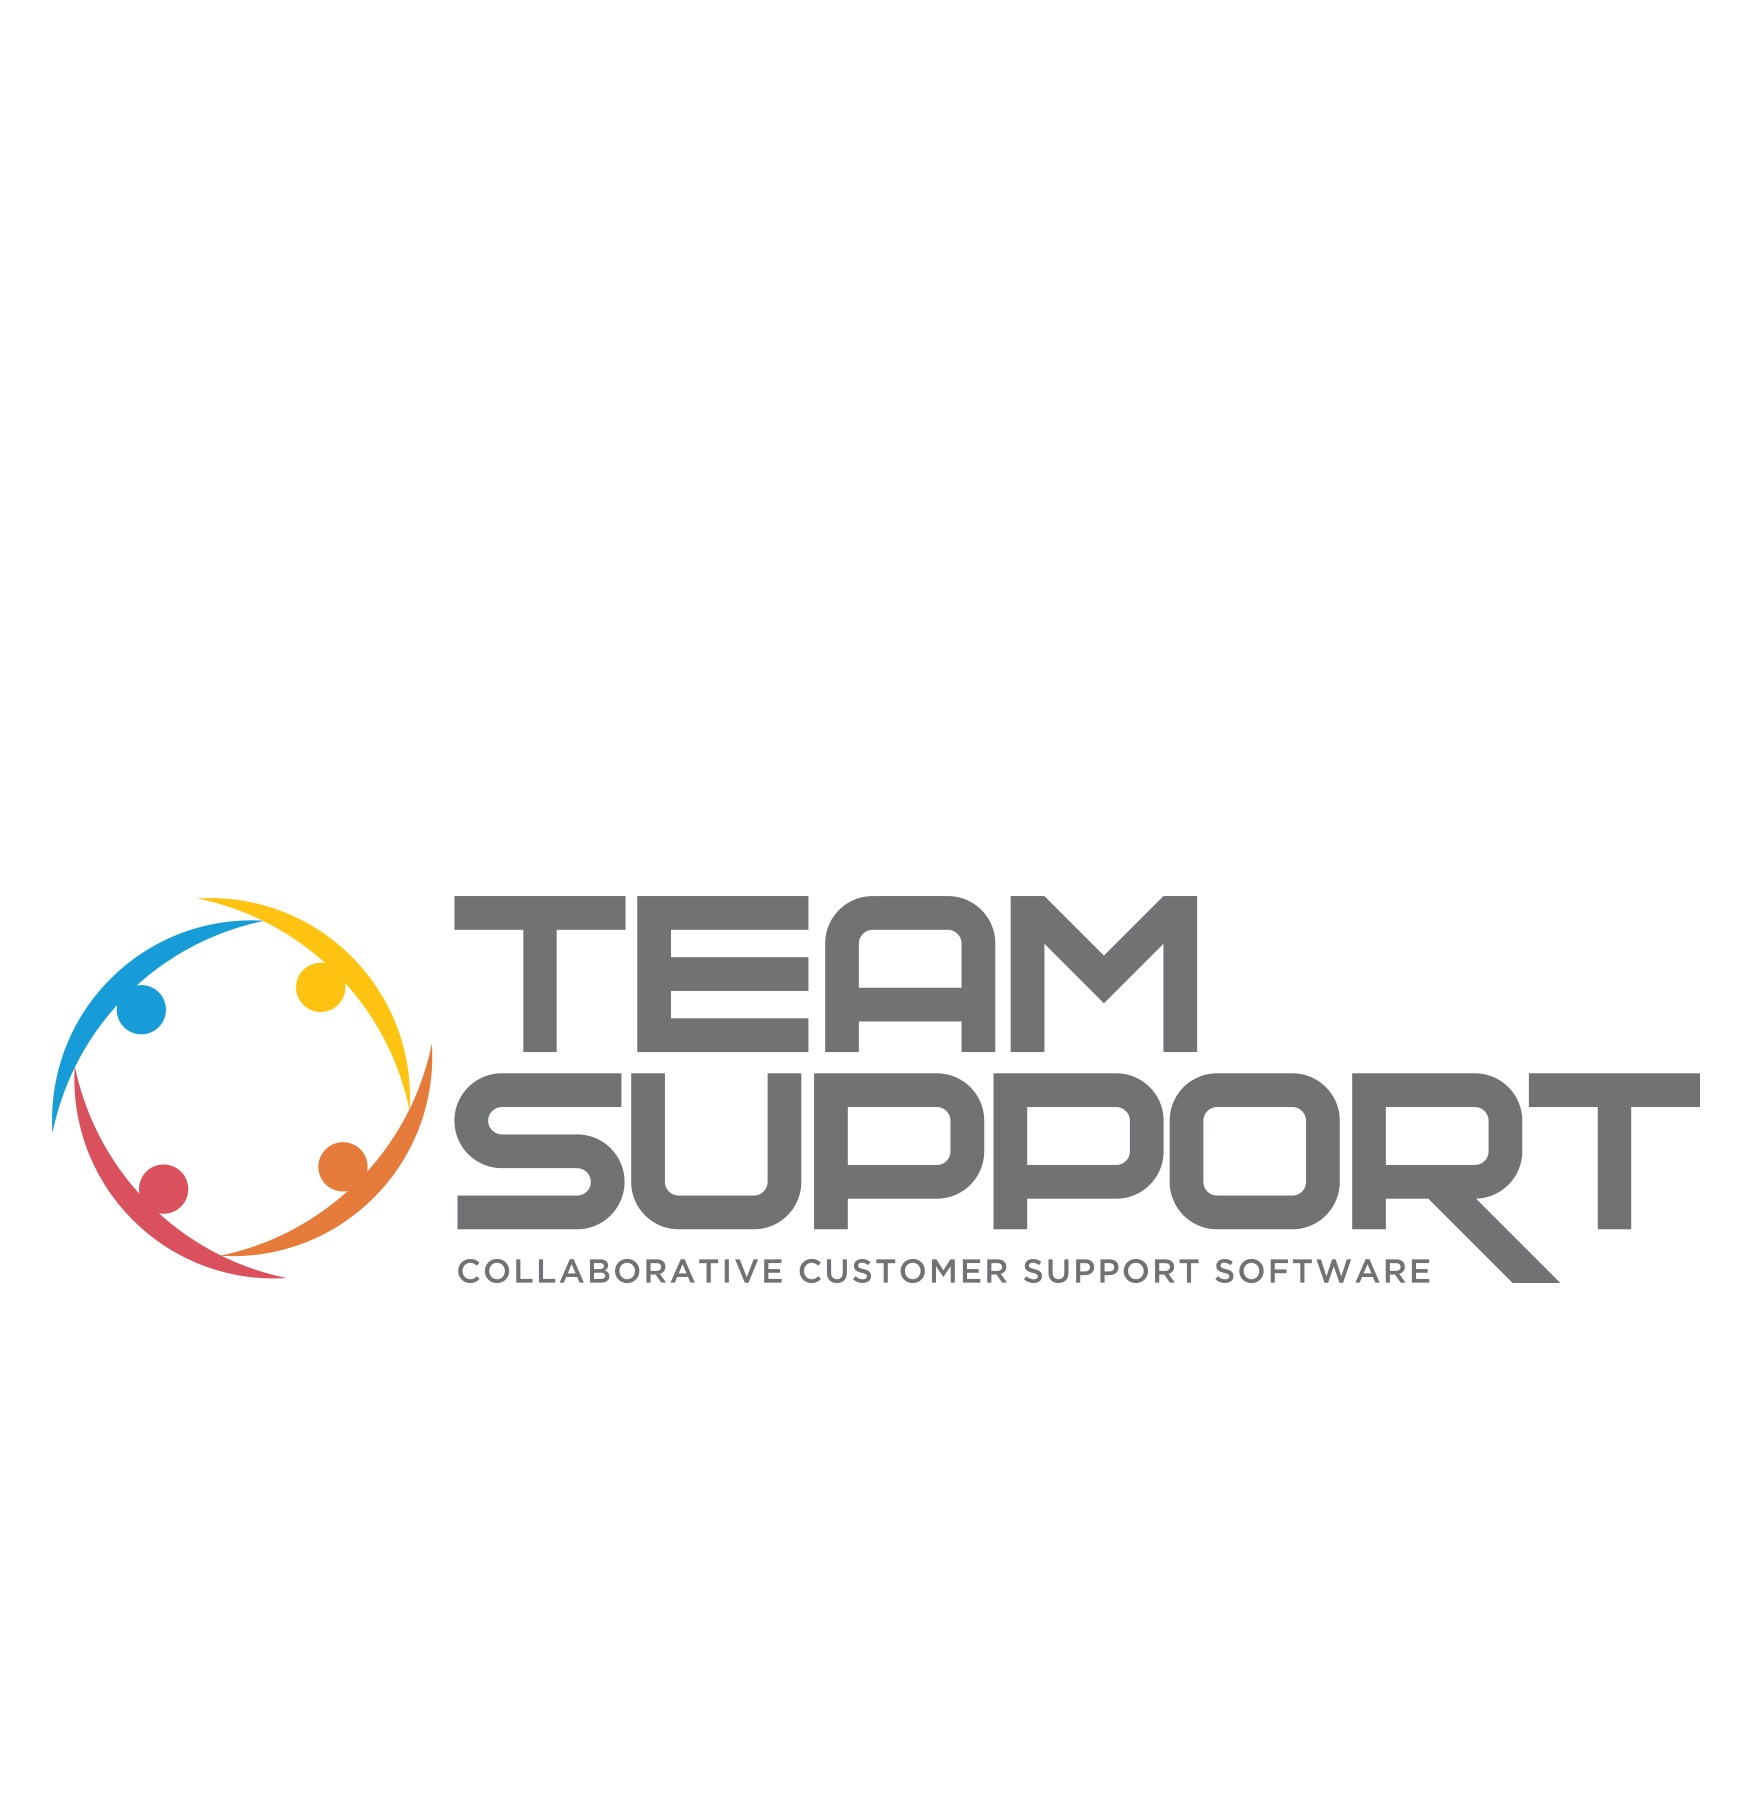 Support terms. Media support лого. PROSUPPORT лого. Support to or for. Support красивая надпись.